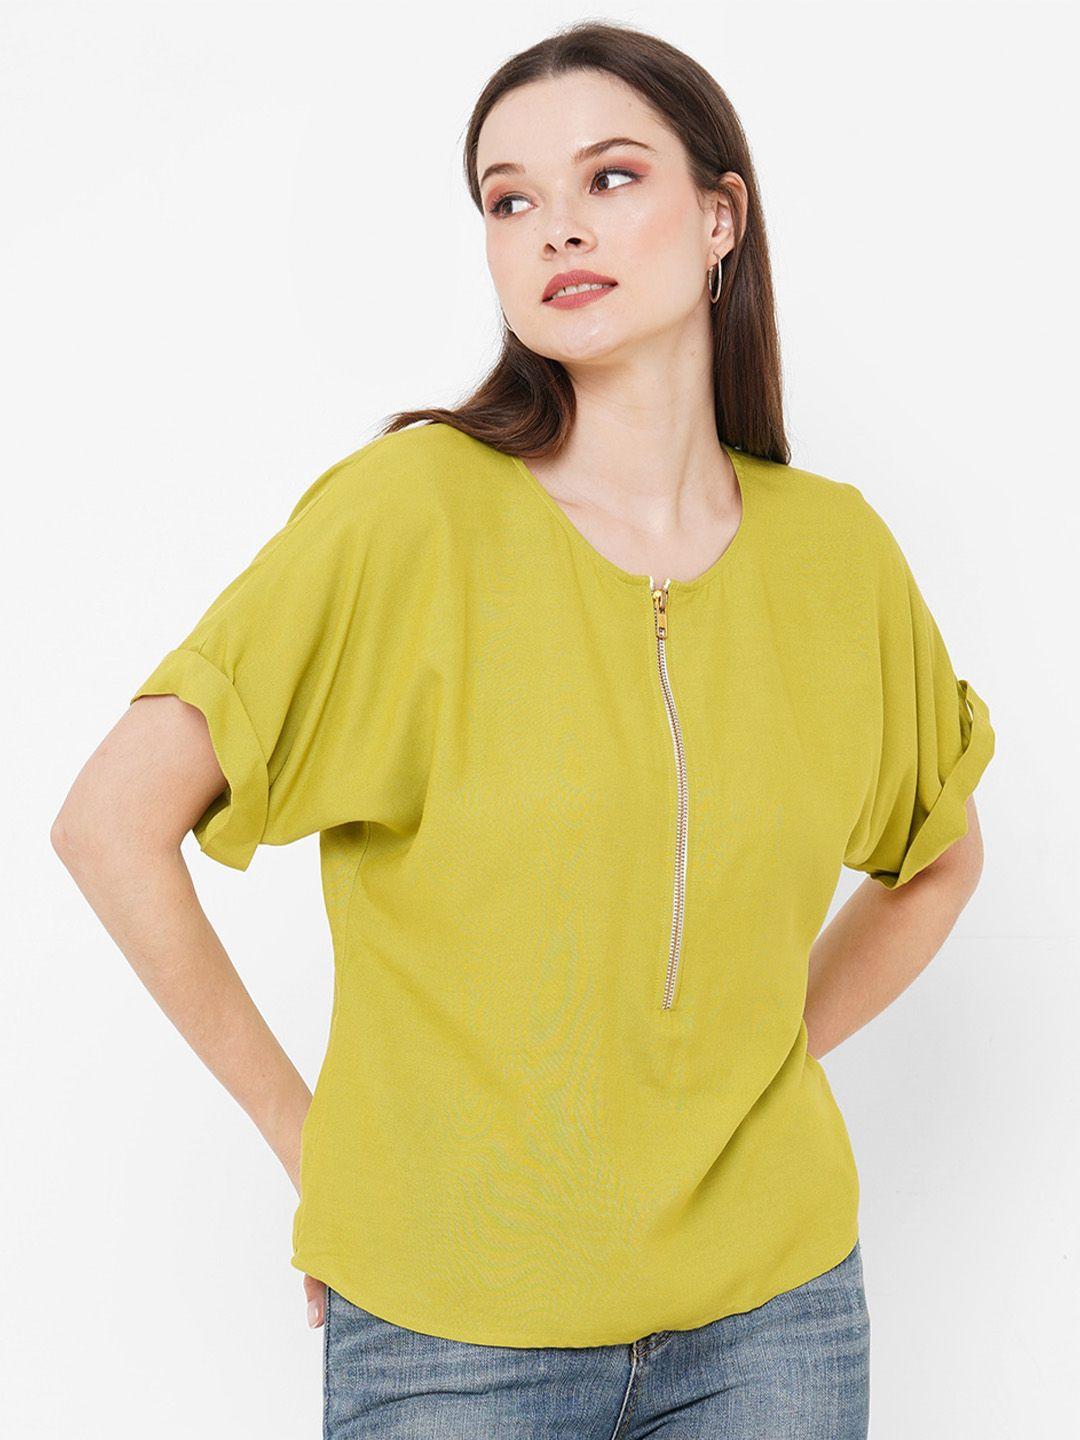 curves by mish round neck extended sleeves top